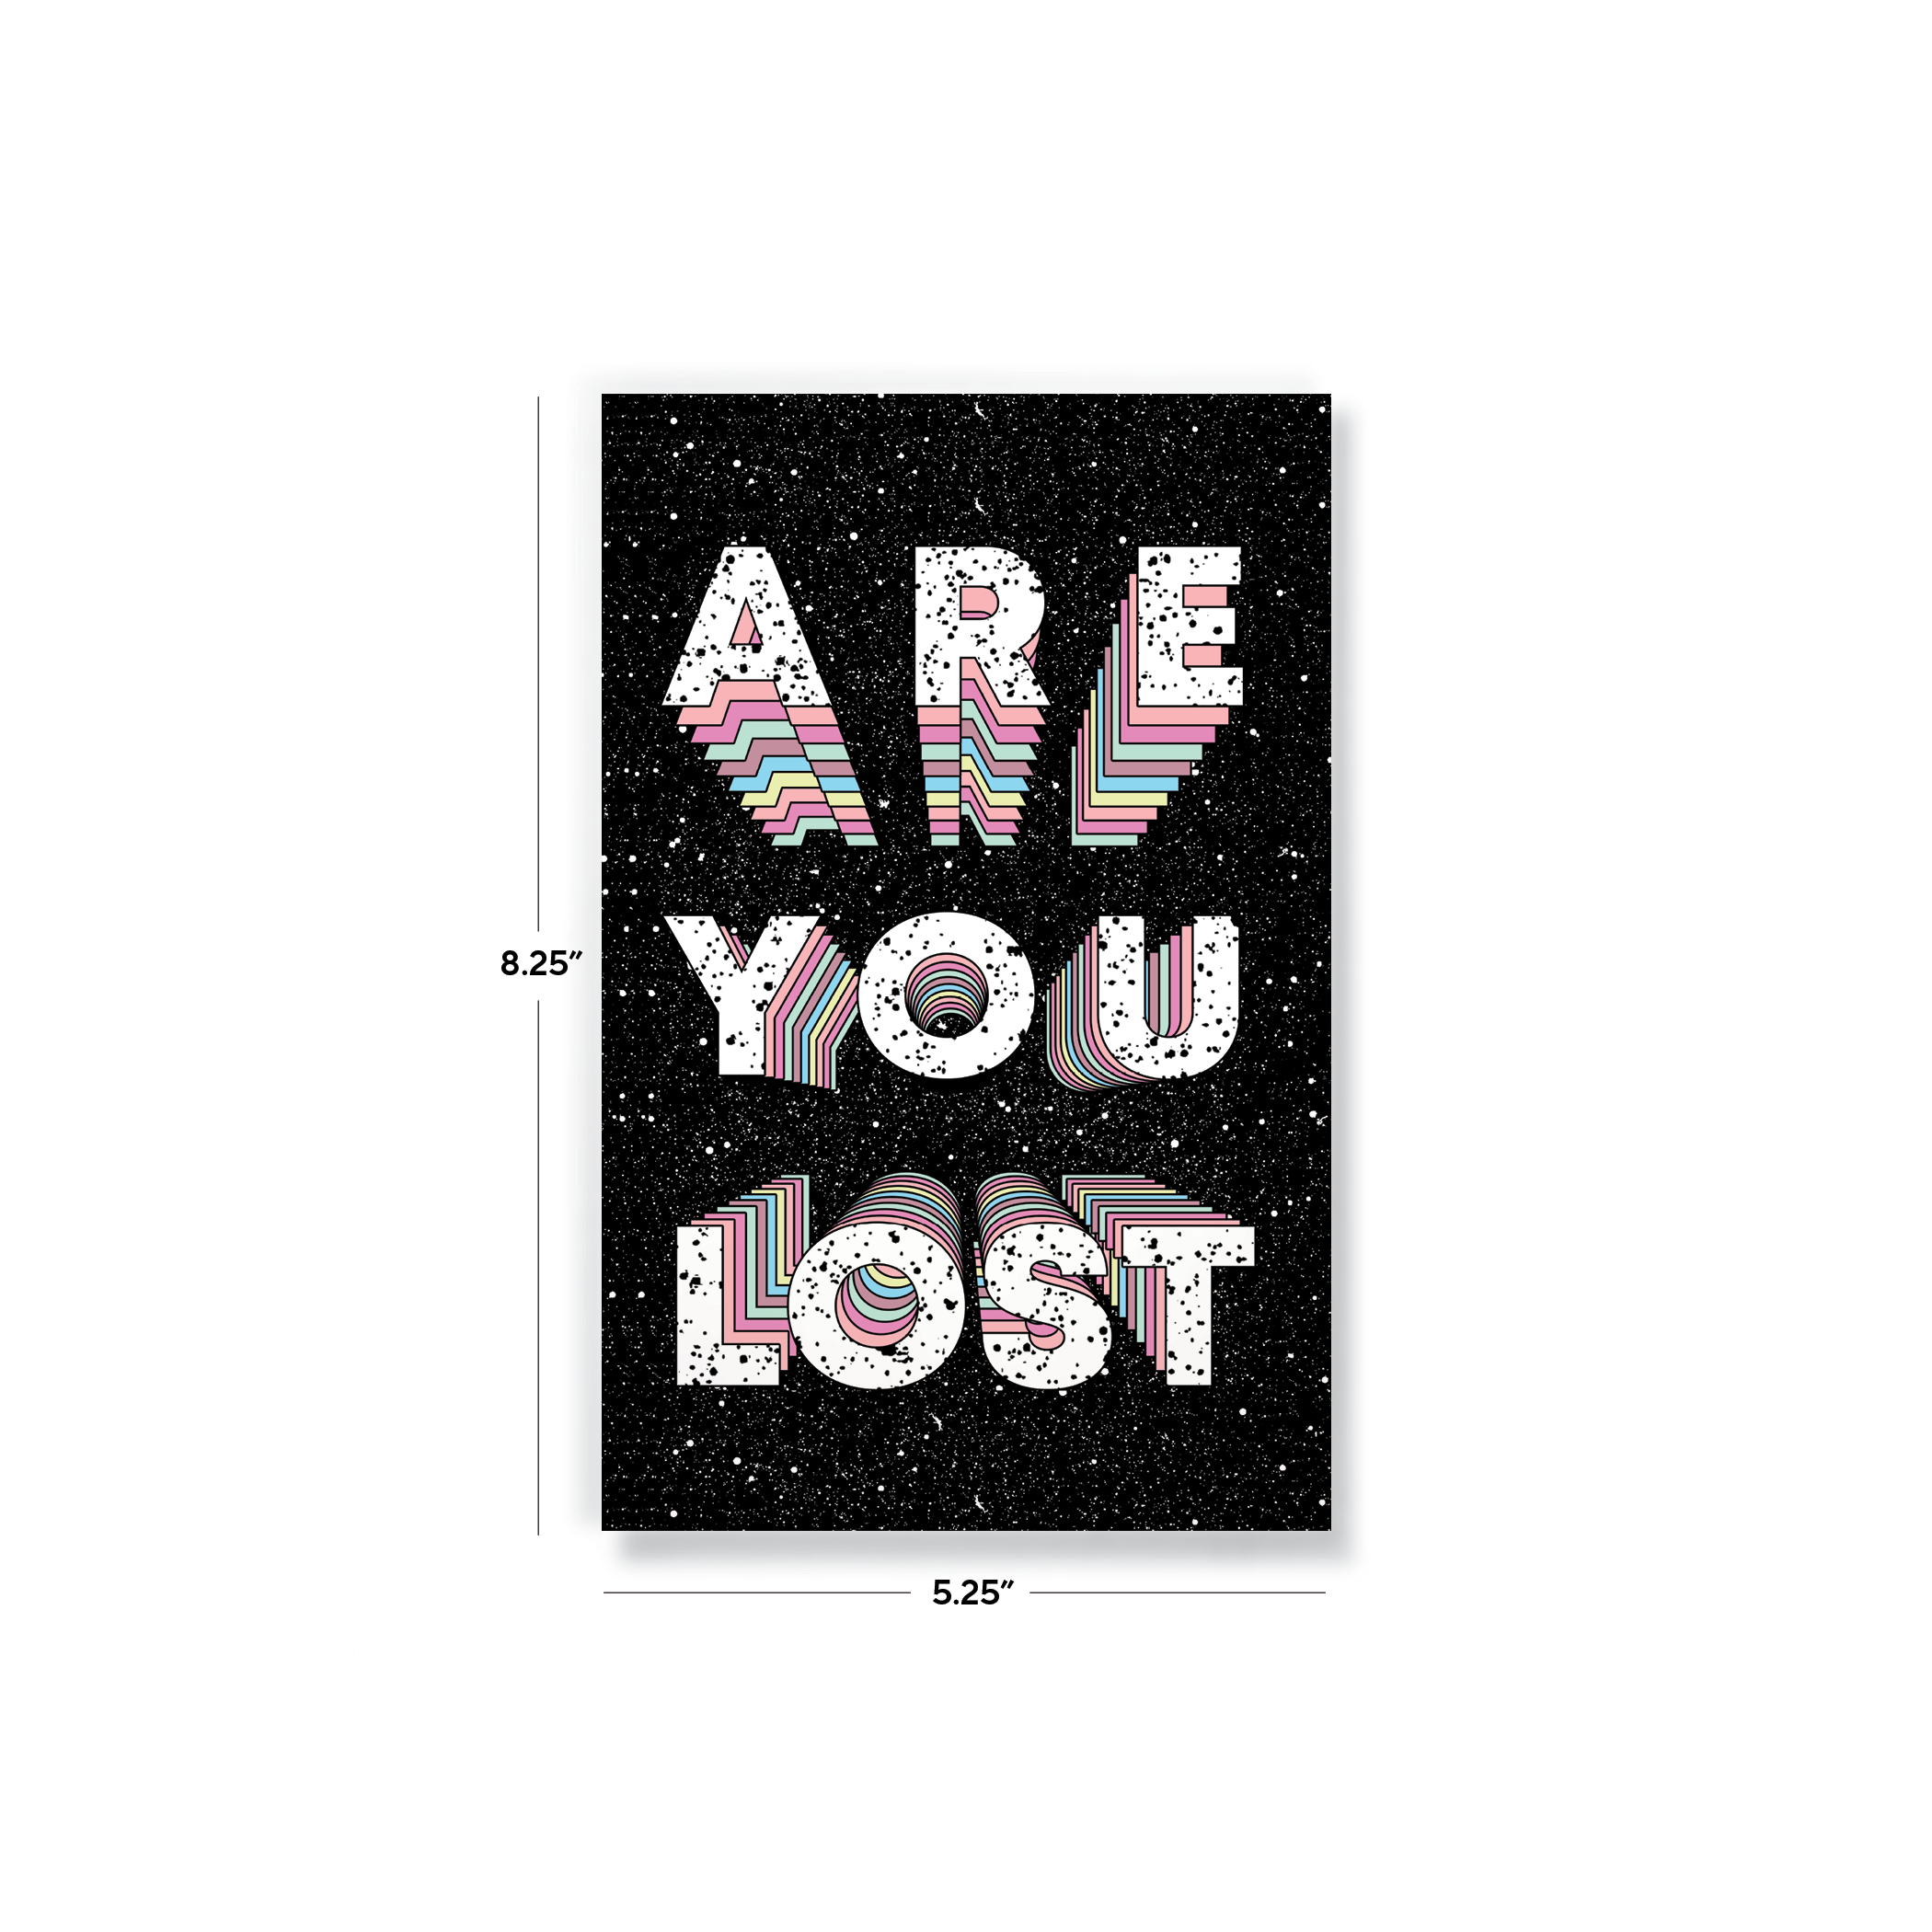 Are You Lost Notebook